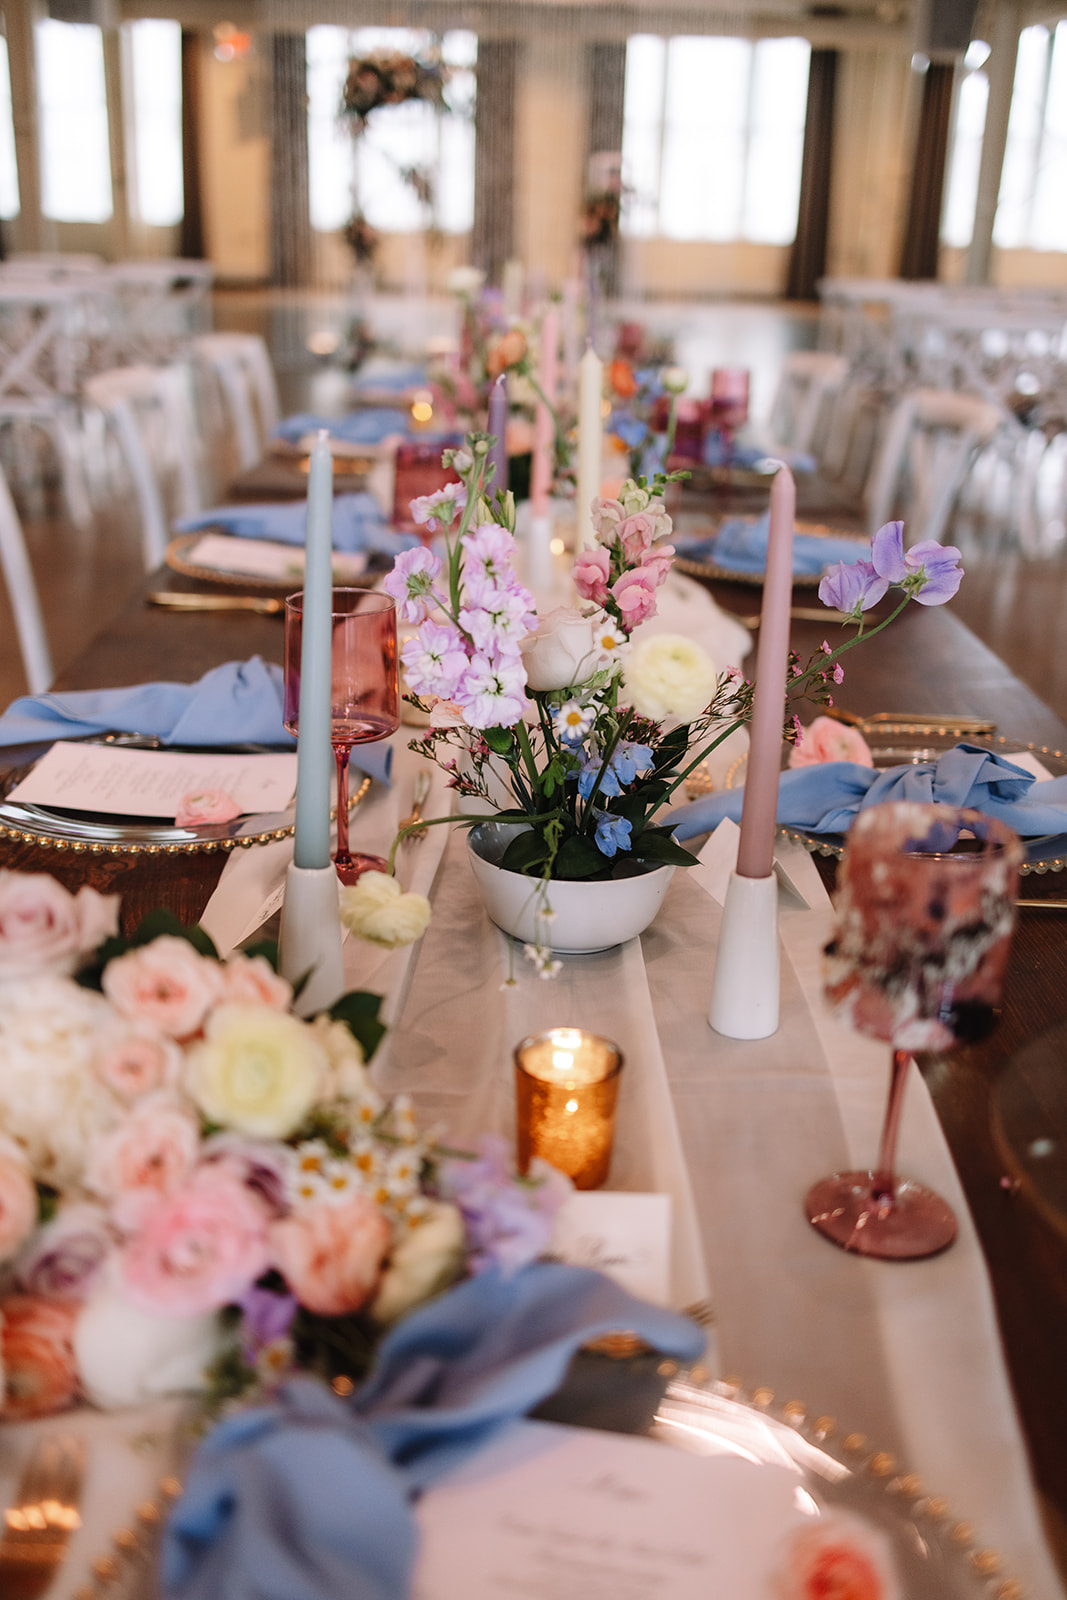 A long dining table is elegantly set for an event with white candles, pink and purple flowers, glassware, and place settings. The centerpiece includes a variety of flowers in a white bowl.